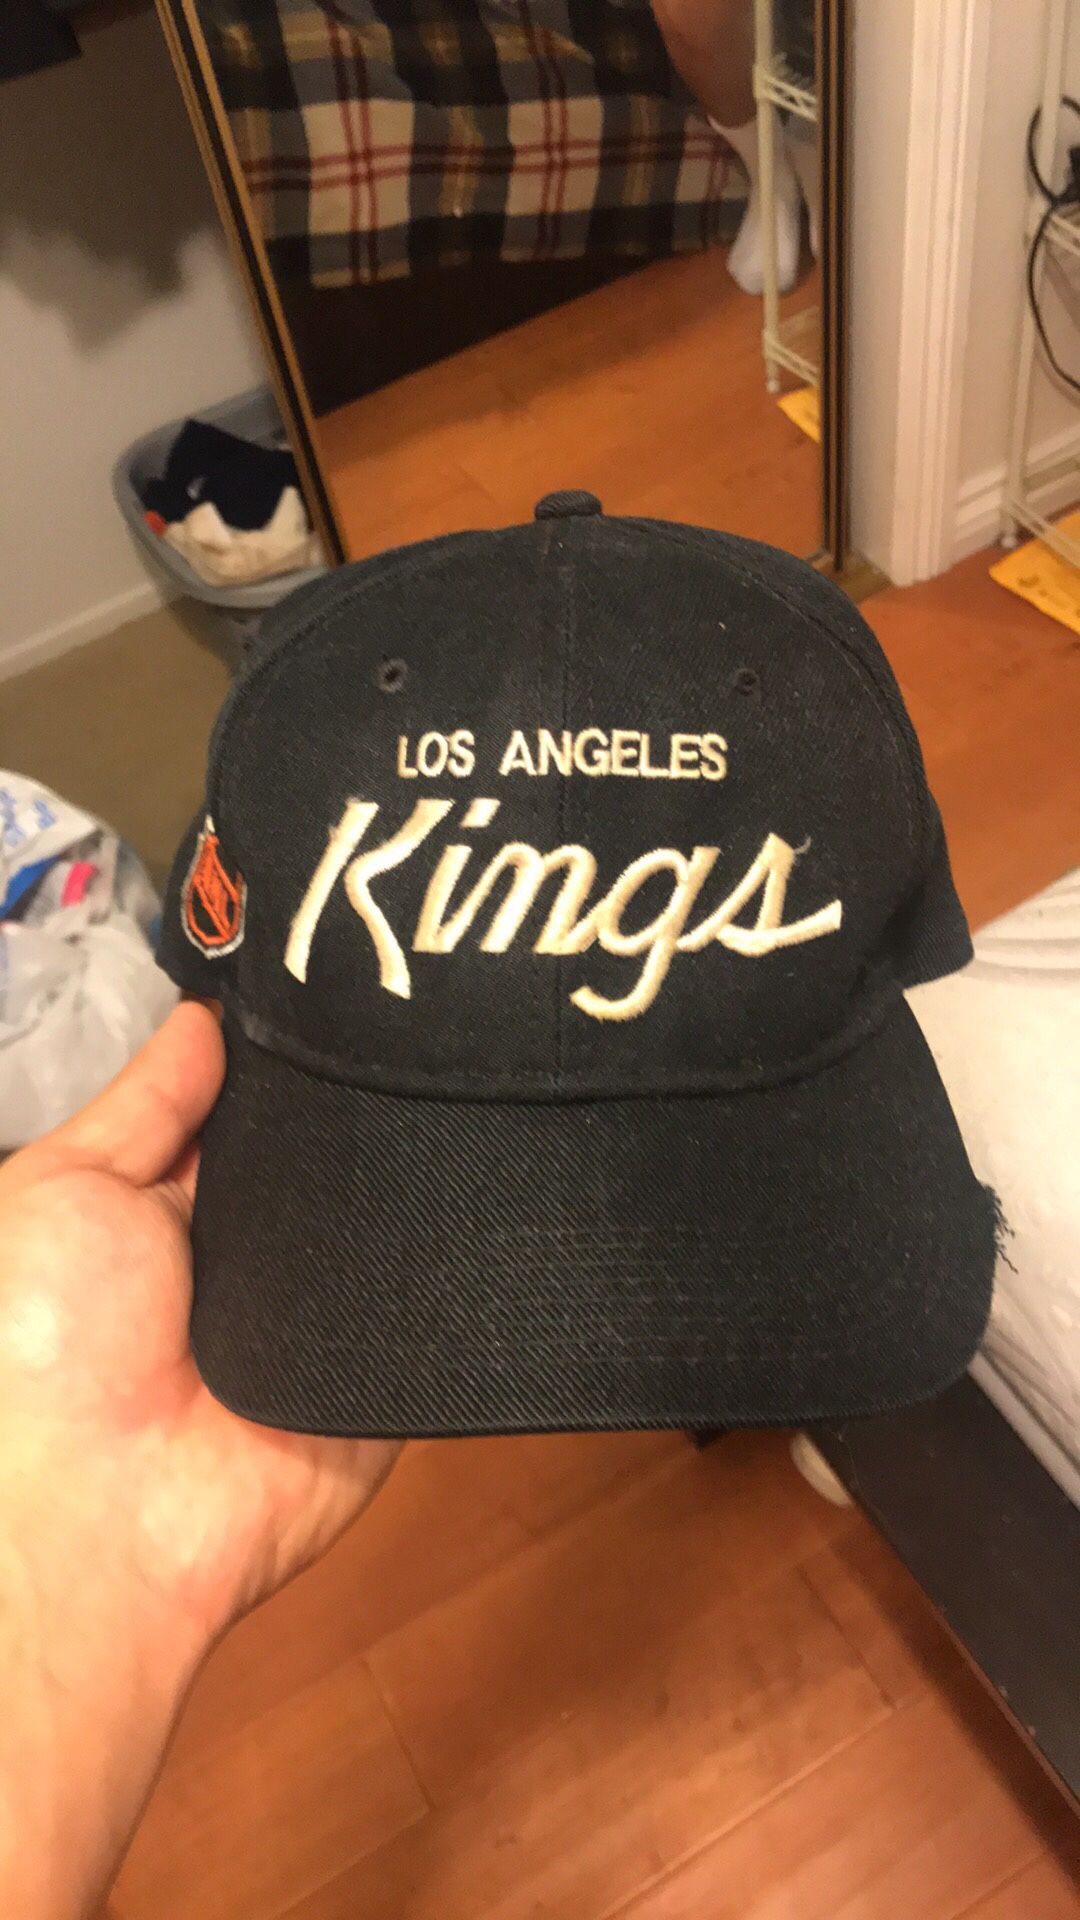 Los Angeles/LA Kings Old School NWA/Eazy E Script Style Fitted New Era Hat/ Cap Size 7 1/4 Vintage Hockey for Sale in Anaheim, CA - OfferUp